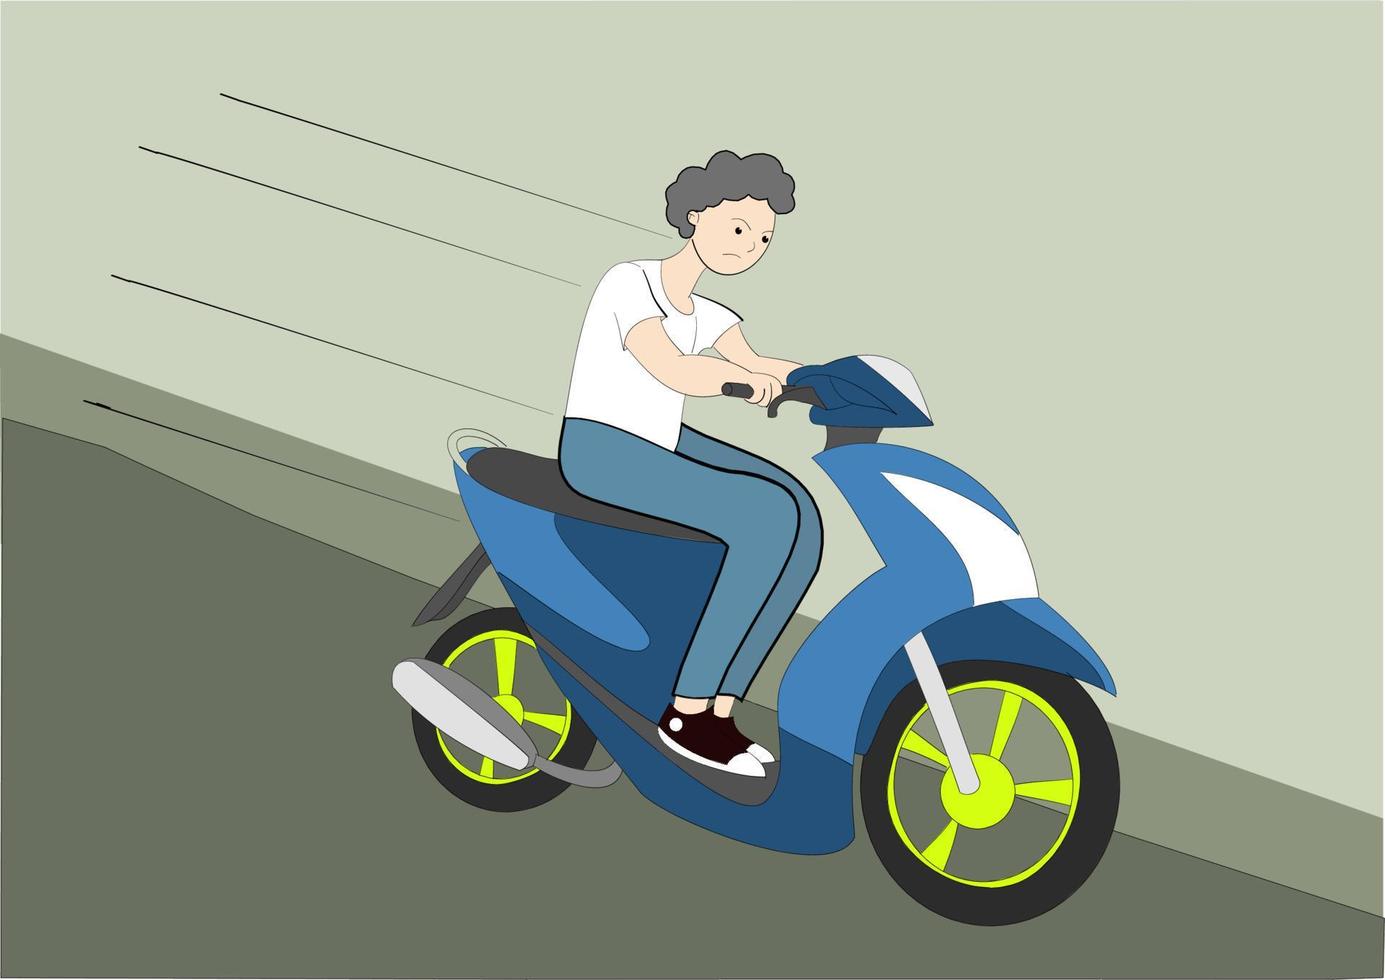 young man riding a motorbike fast on the highway vector